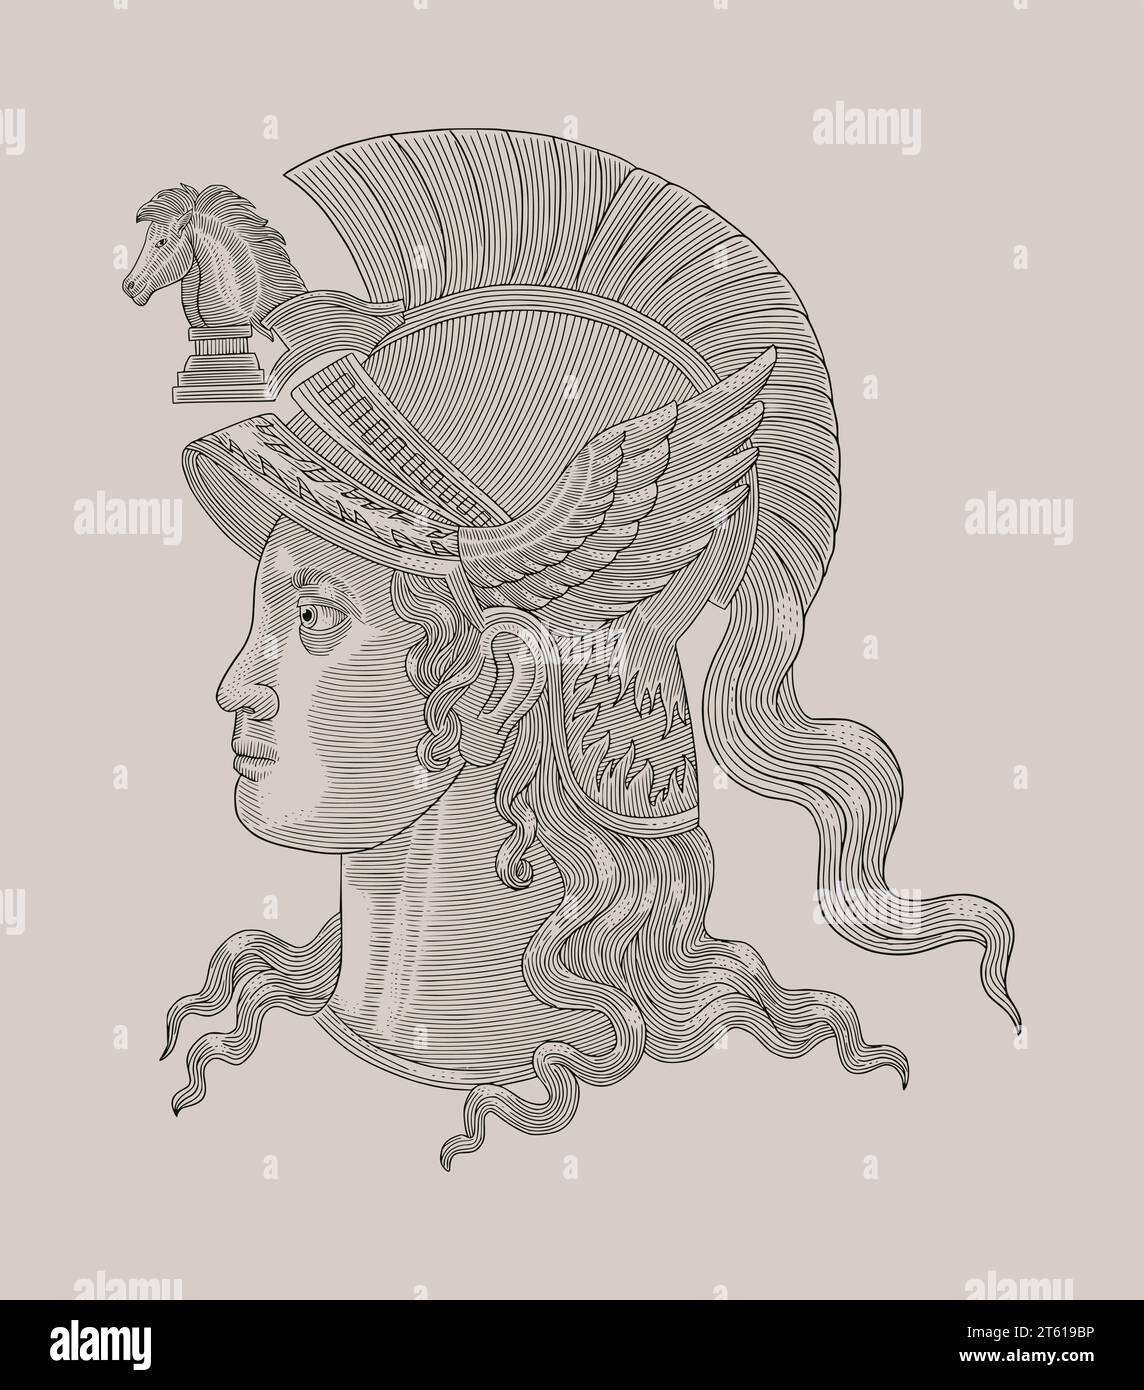 Goddess athena from greek roman, vintage engraving drawing style illustration Stock Vector